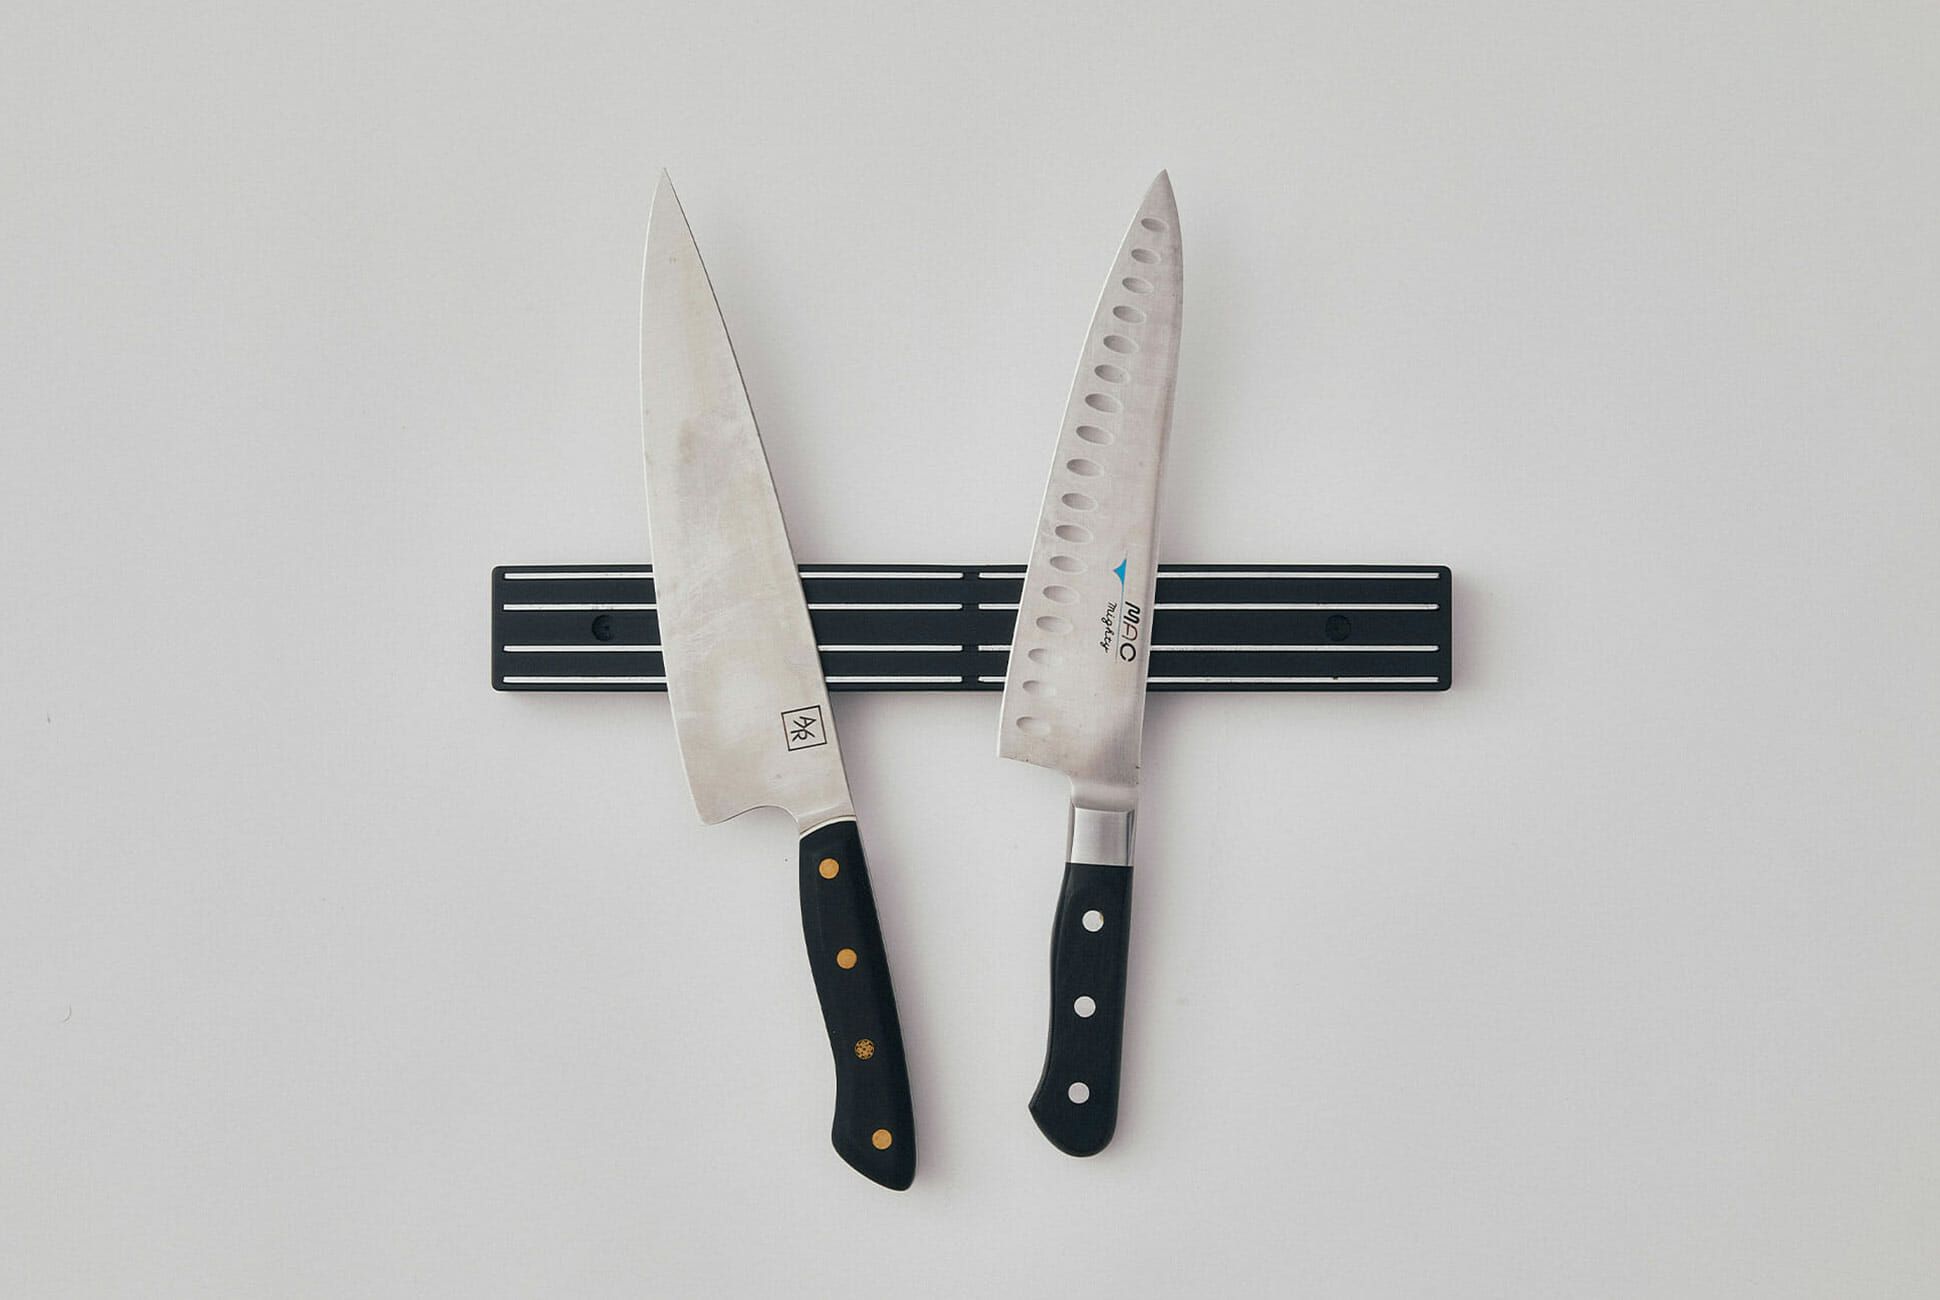 https://hips.hearstapps.com/amv-prod-gp.s3.amazonaws.com/gearpatrol/wp-content/uploads/2020/03/How-To-Take-Care-of-Your-Kitchen-Knife-gear-patrol-lead-full.jpg